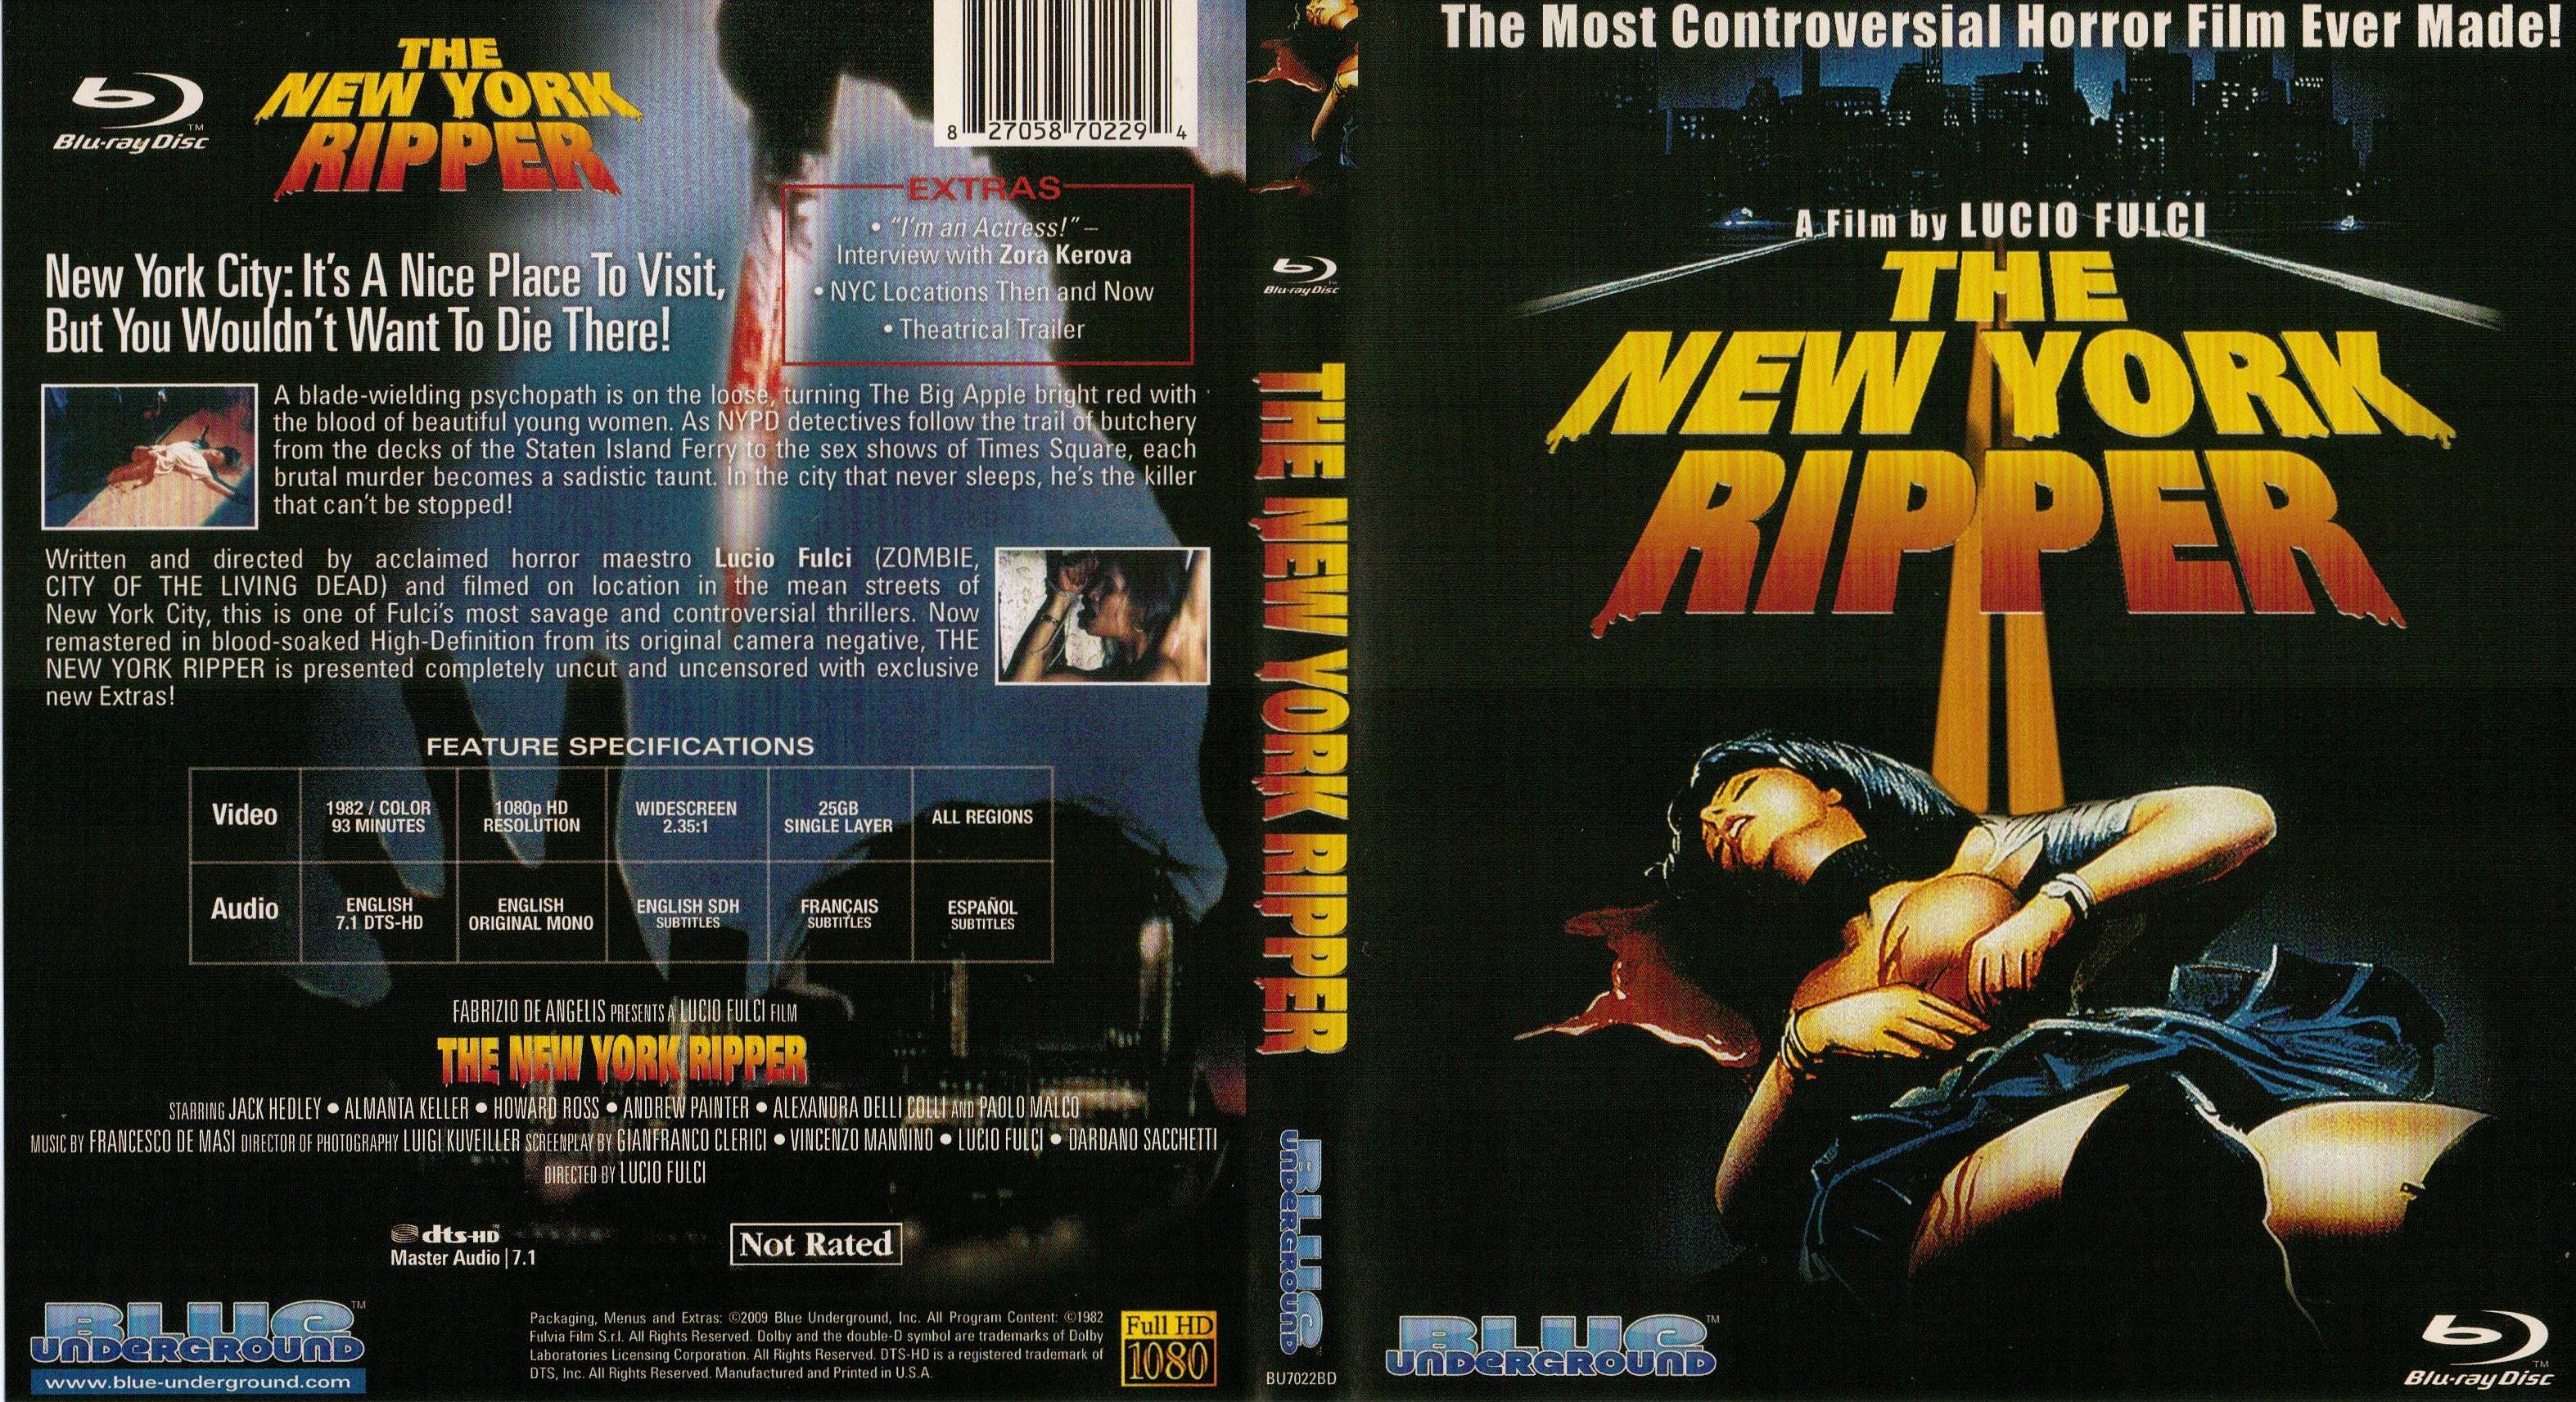 Jaquette DVD The New York Ripper Zone 1 (BLU-RAY)